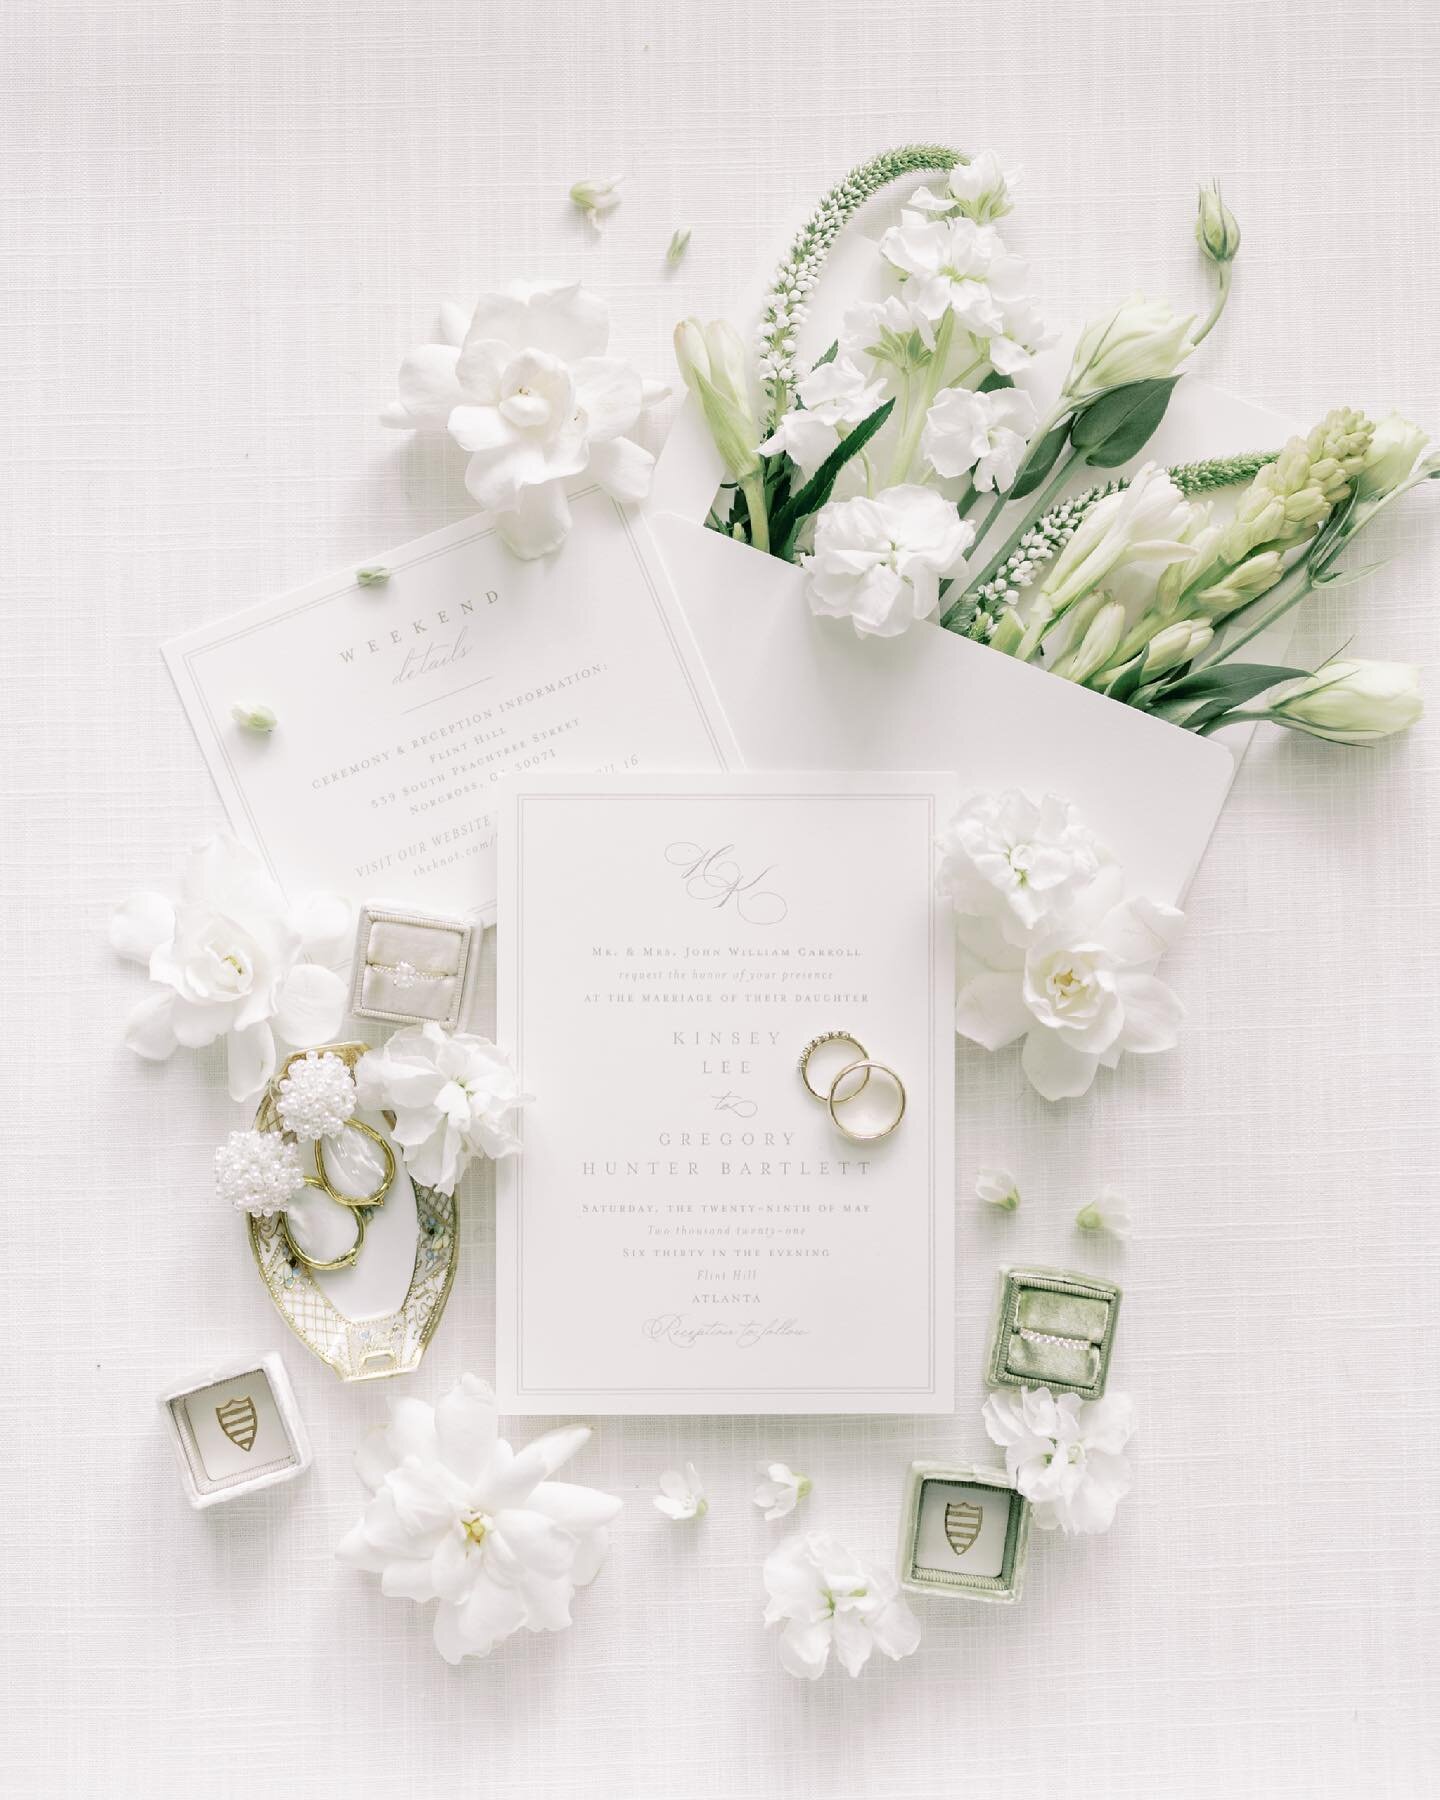 Kinsey and Hunter&rsquo;s details were stunning - I love having the color consistency all the way from start to finish in a wedding gallery and florals are so helpful to complete the flat lays! 
.
Photography: @haintbluecollective
Venue: @flinthillwe